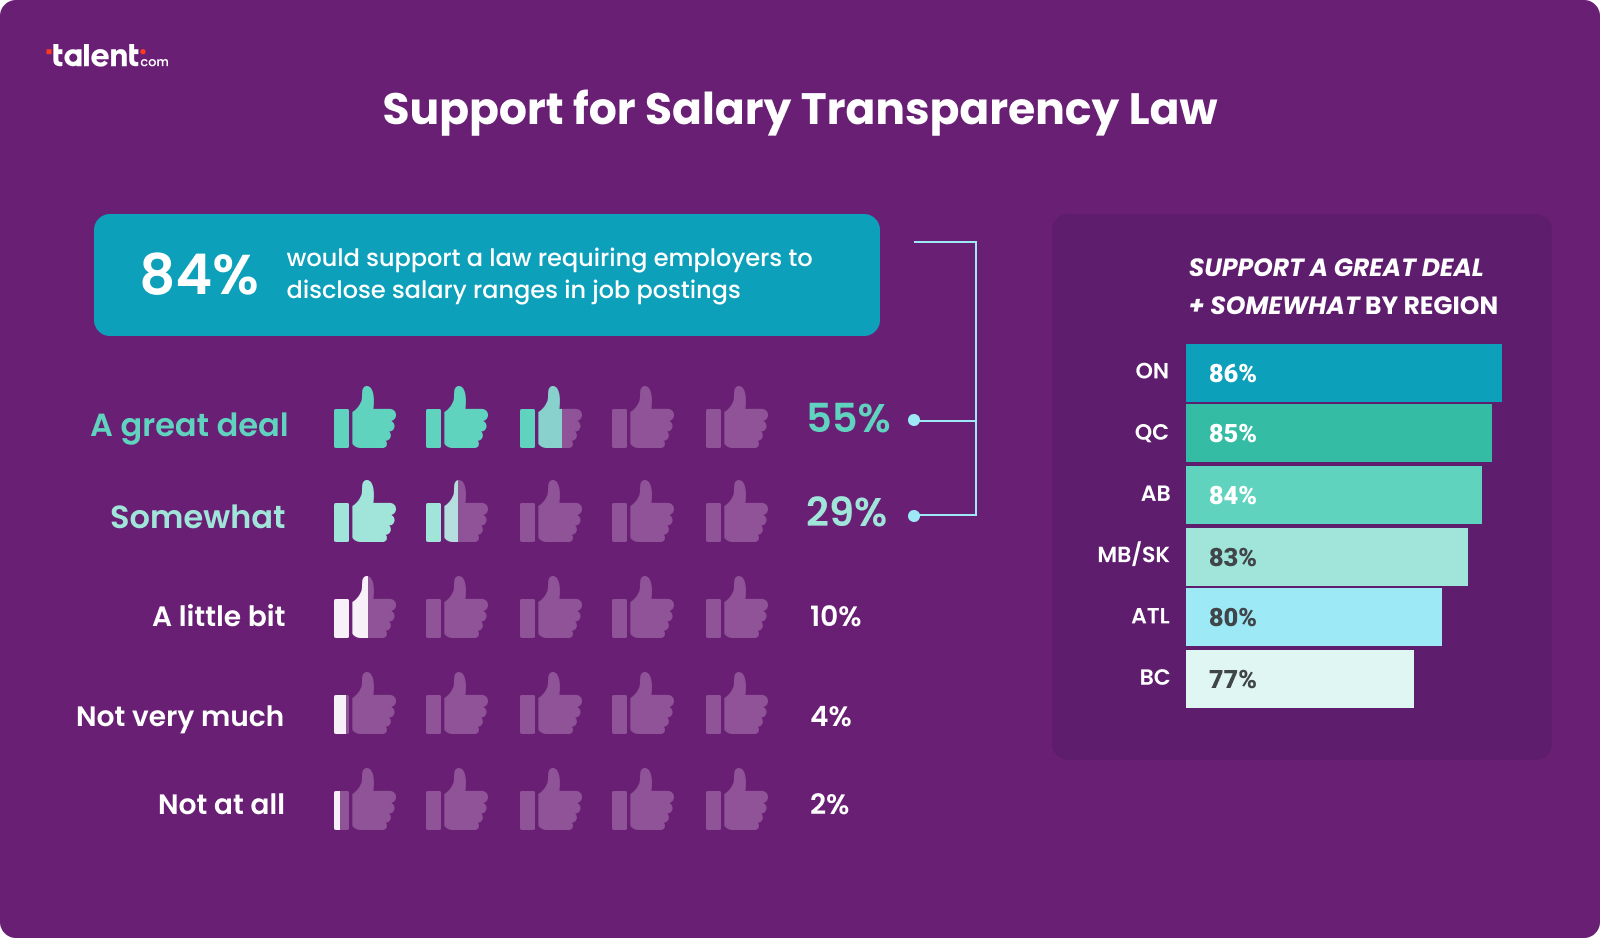 How high is the support for salary transparency?